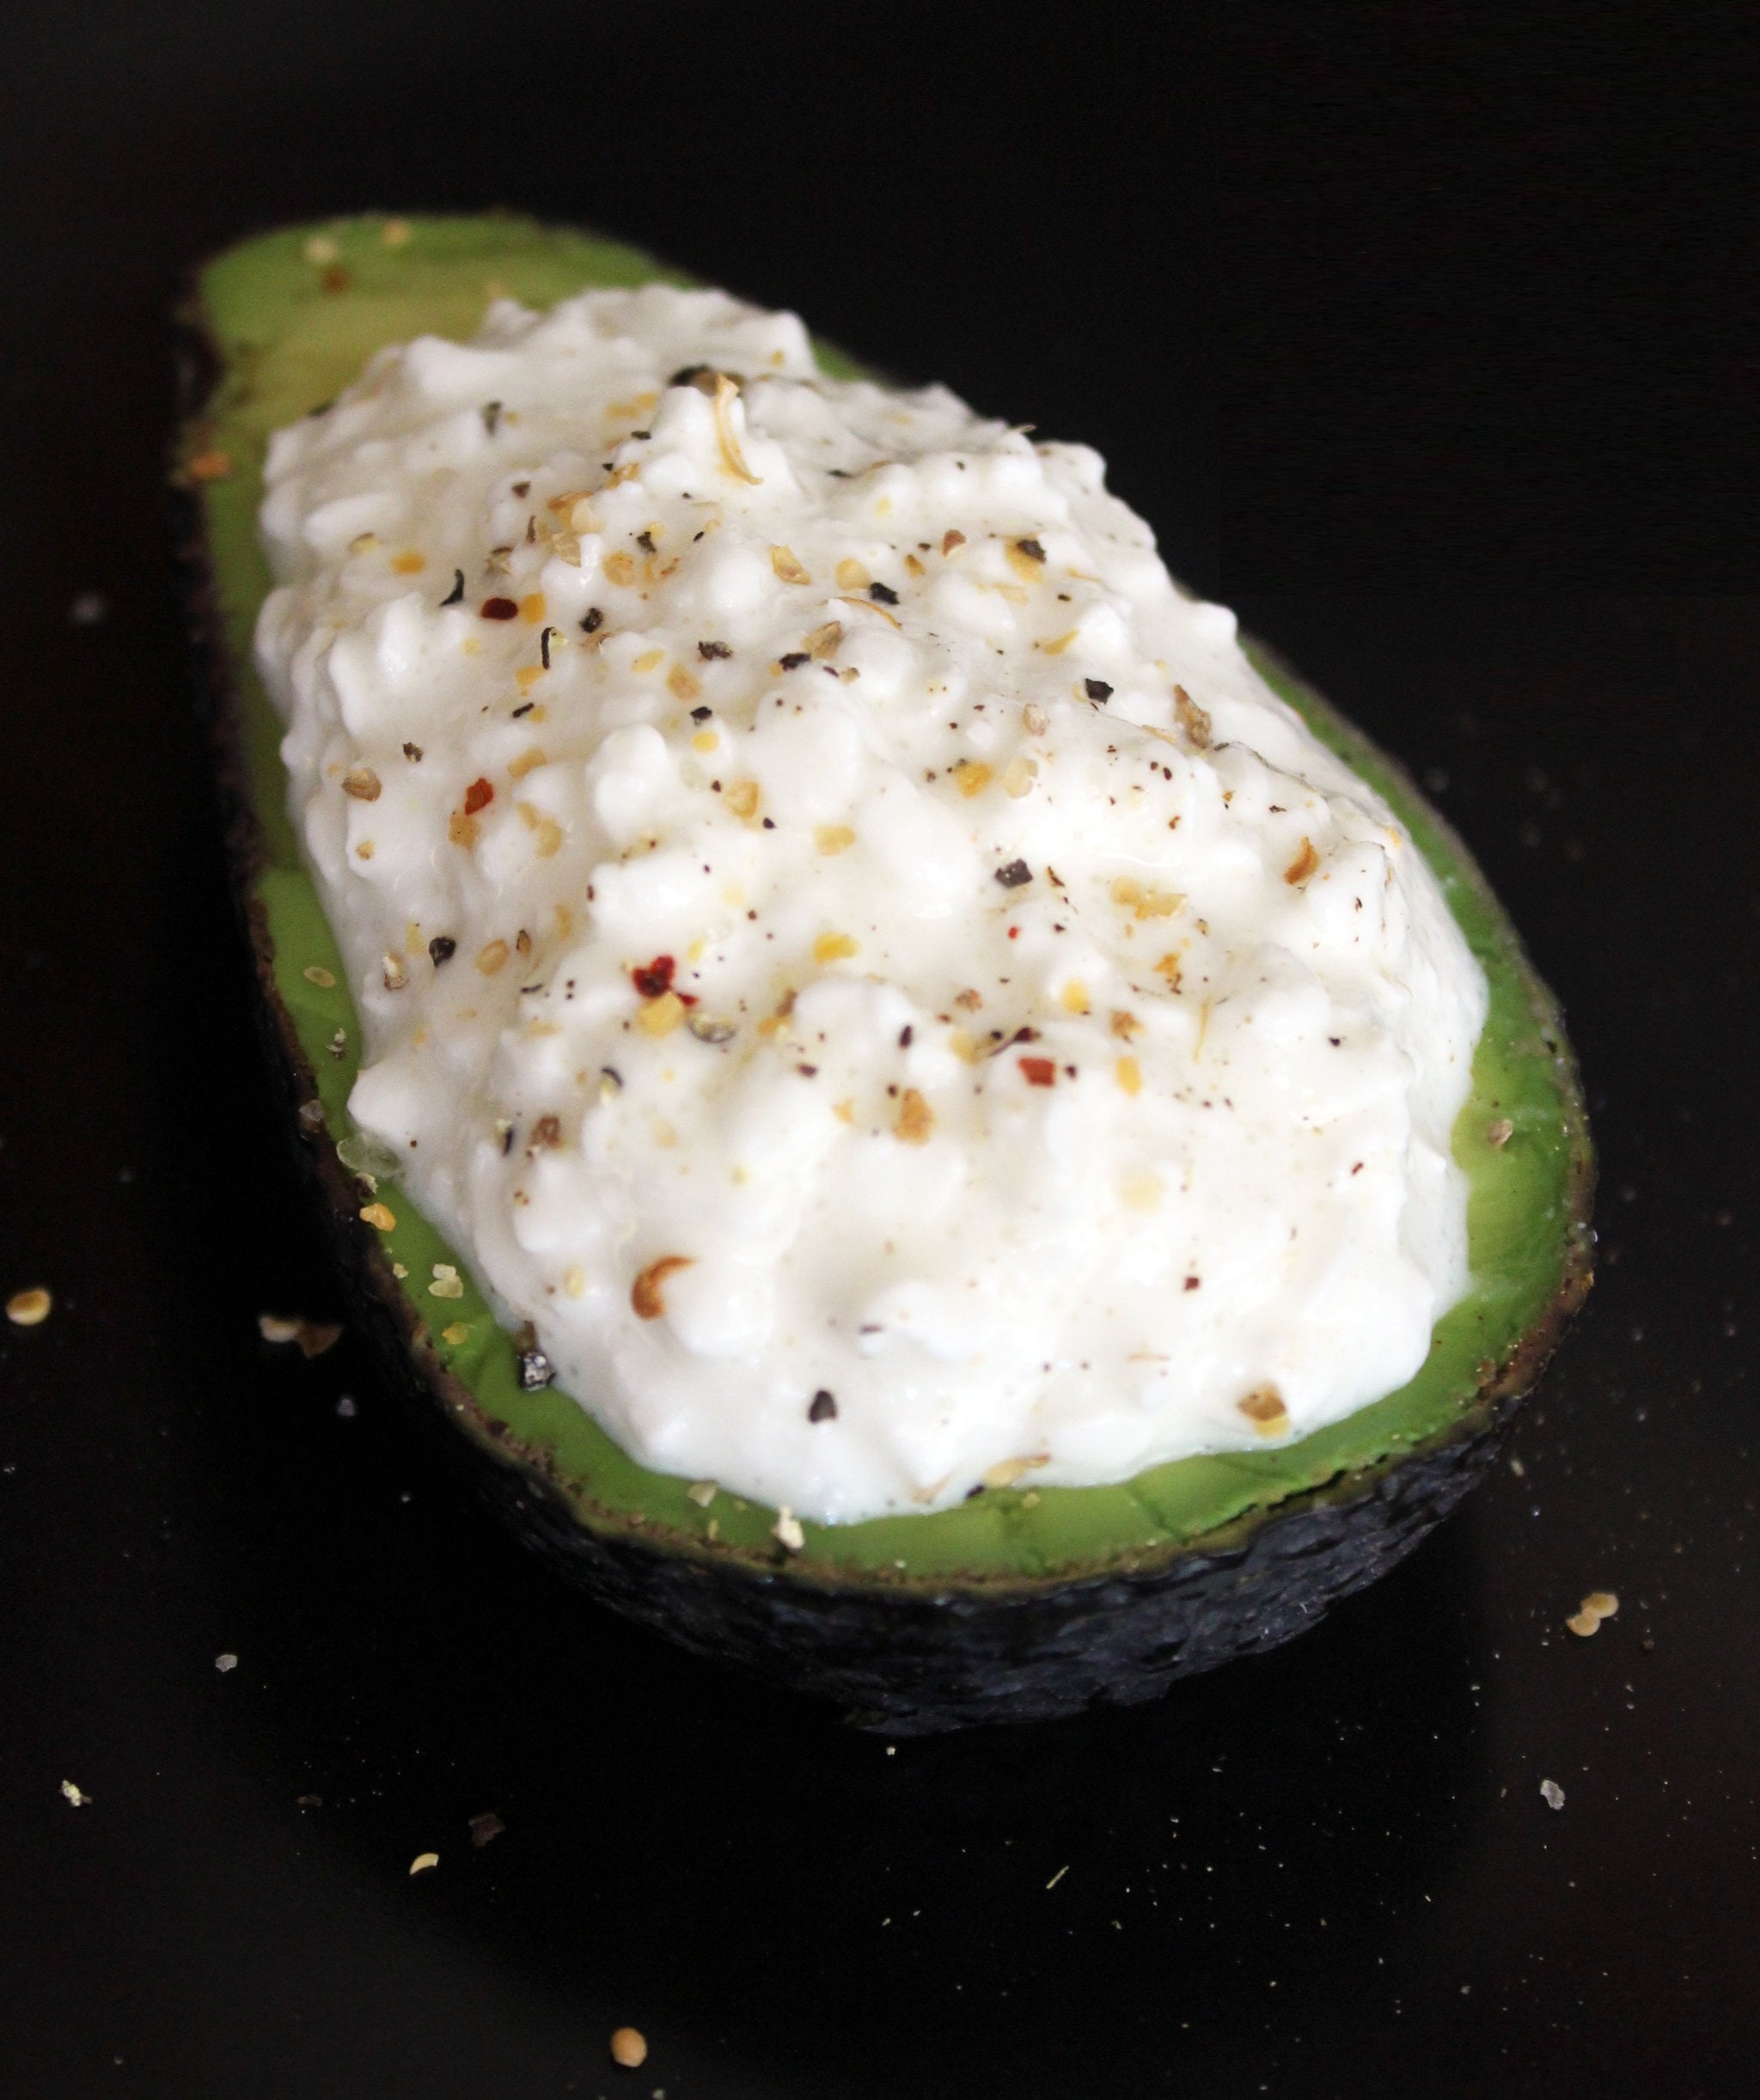 Snack Avocado With Cottage Cheese Customize Your 7 Day Macro